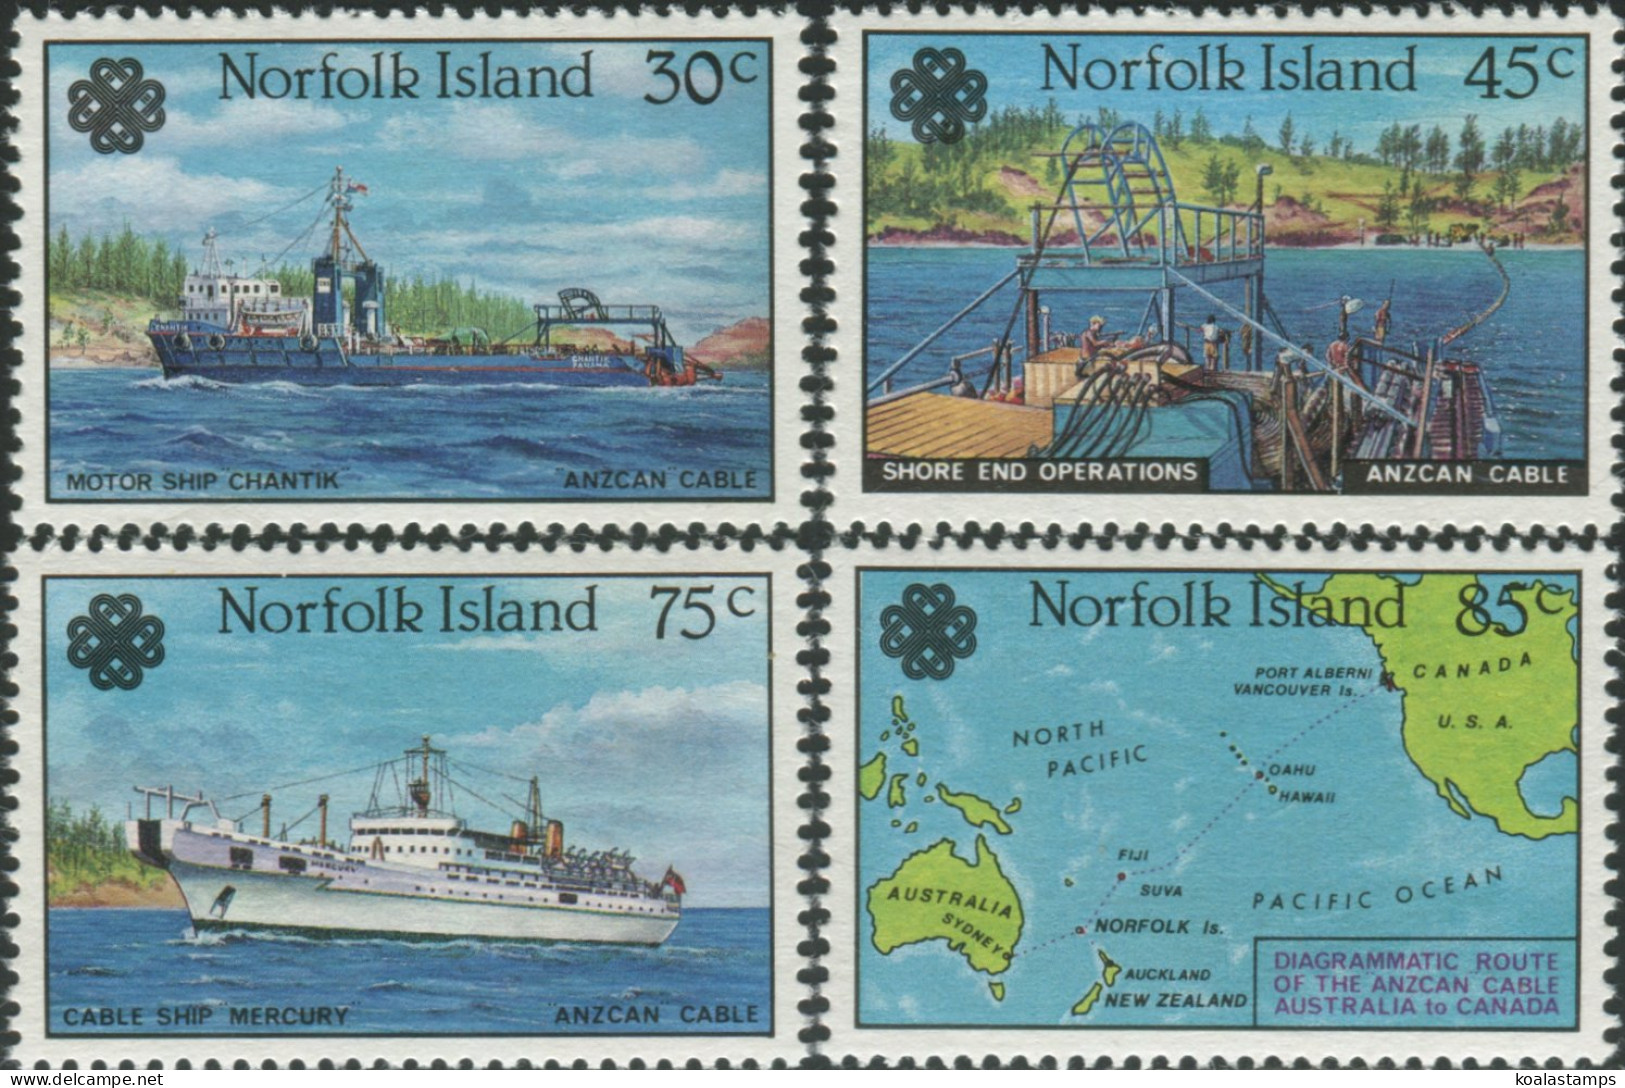 Norfolk Island 1983 SG314-317 ANZCAN Cable Set MNH - Isola Norfolk